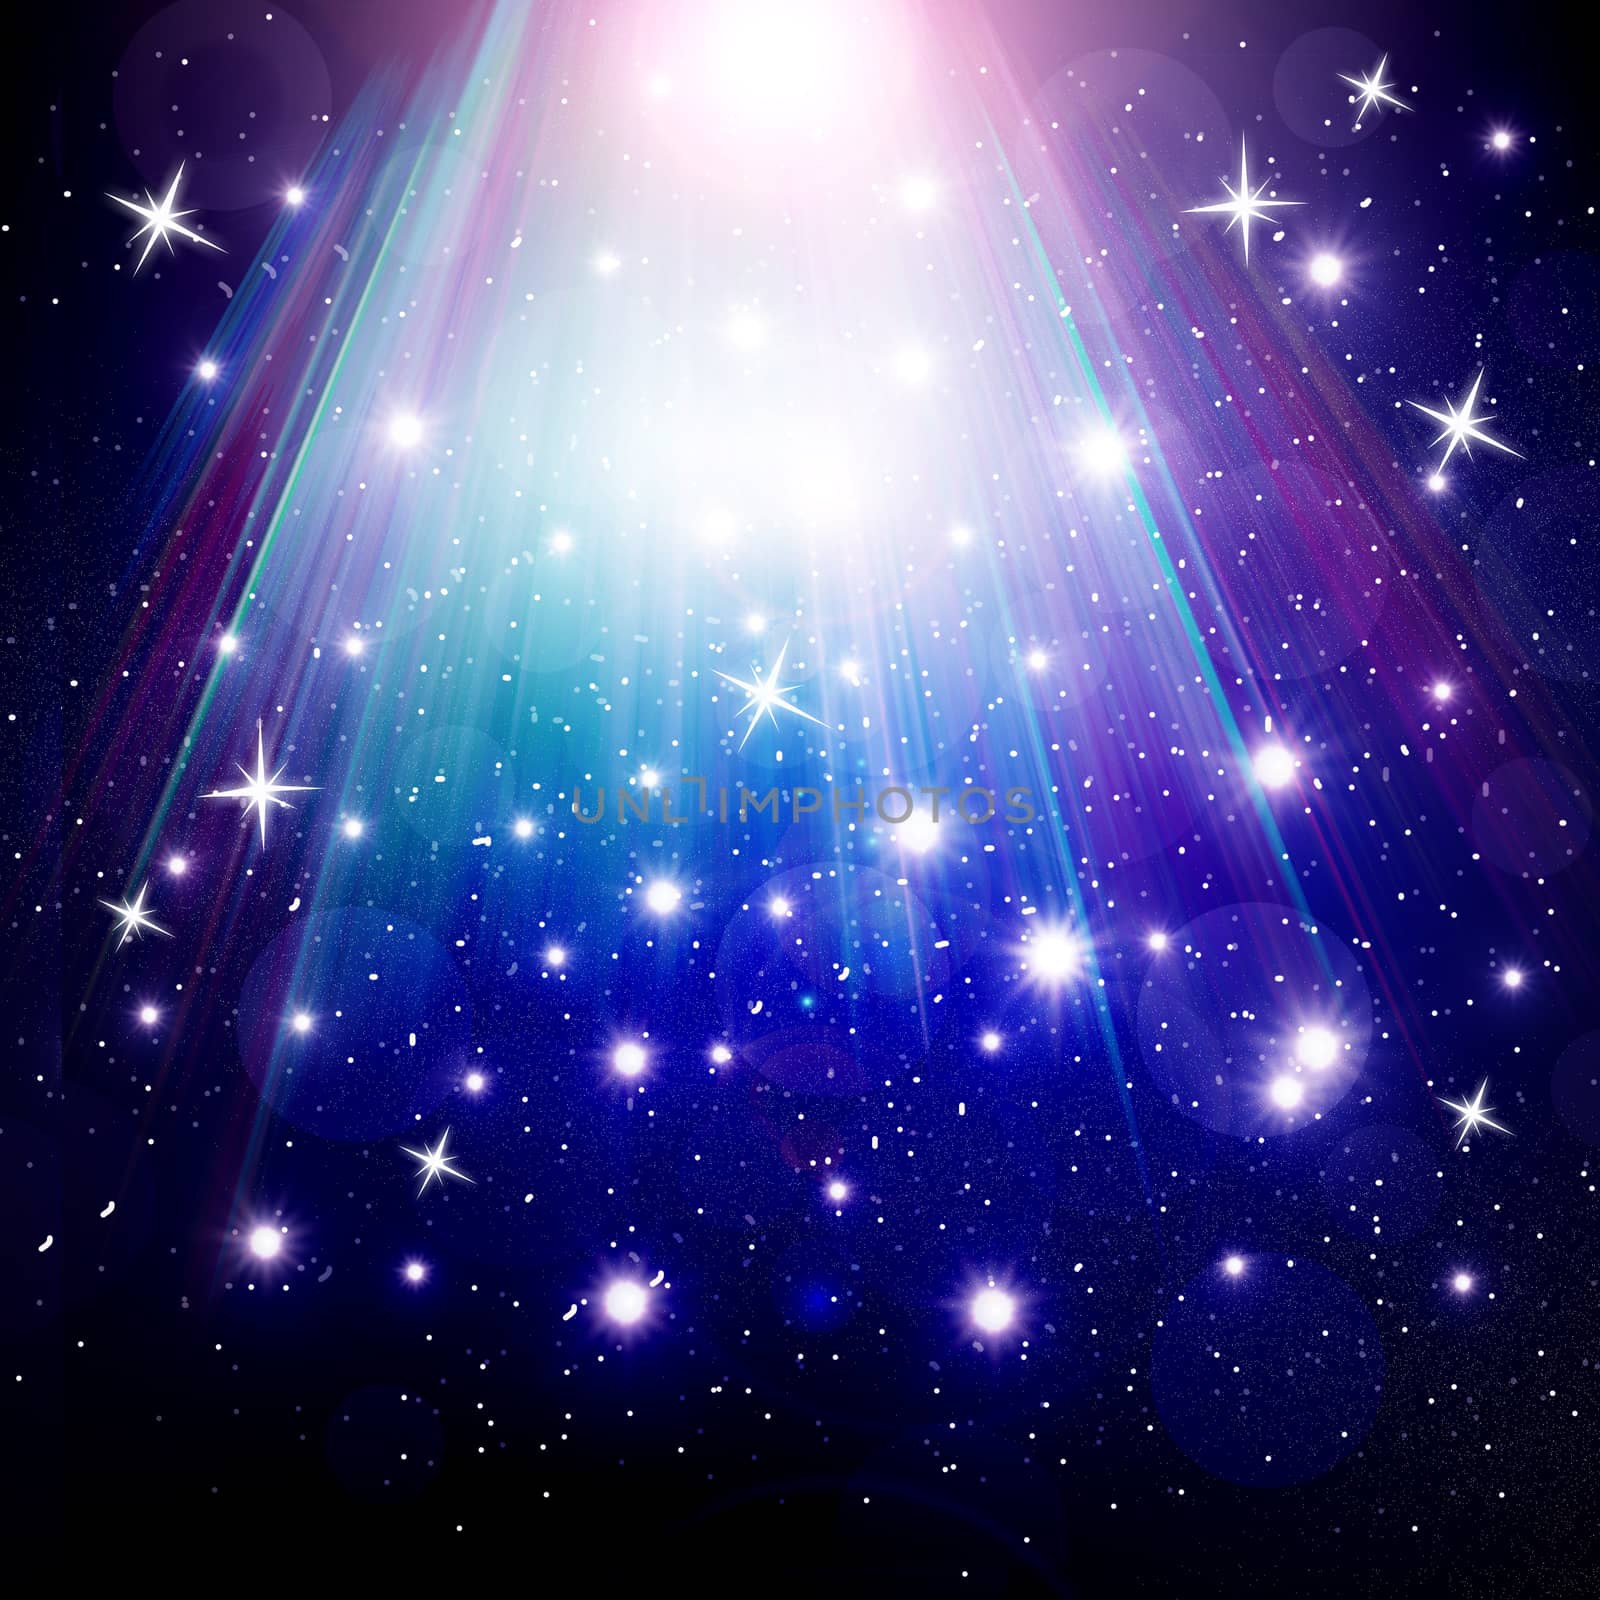 stars are falling on the background of blue luminous rays. by sommai